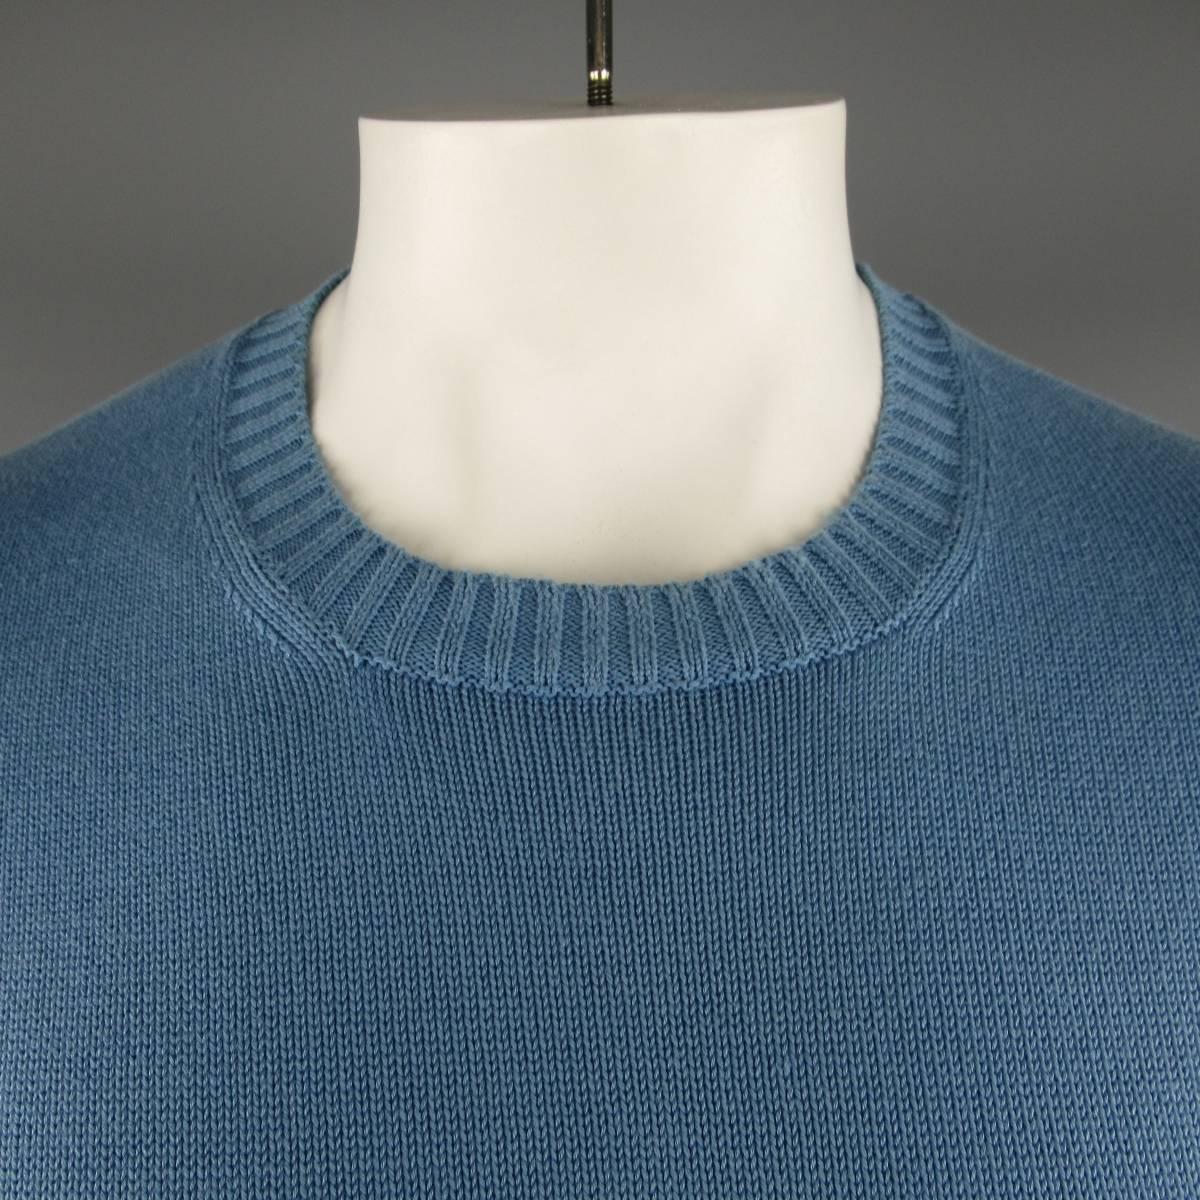 Classic BRUNELLO CUCINELLI pullover sweater in a cotton knit with ribbed waistband. Made in Italy.
 
Good Pre-Owned Condition.
Marked: IT 52
 
Measurements:
 
Shoulder: 18 in.
Chest: 44 in.
Sleeve: 27 in.
Length: 28 in.

SKU: 84054